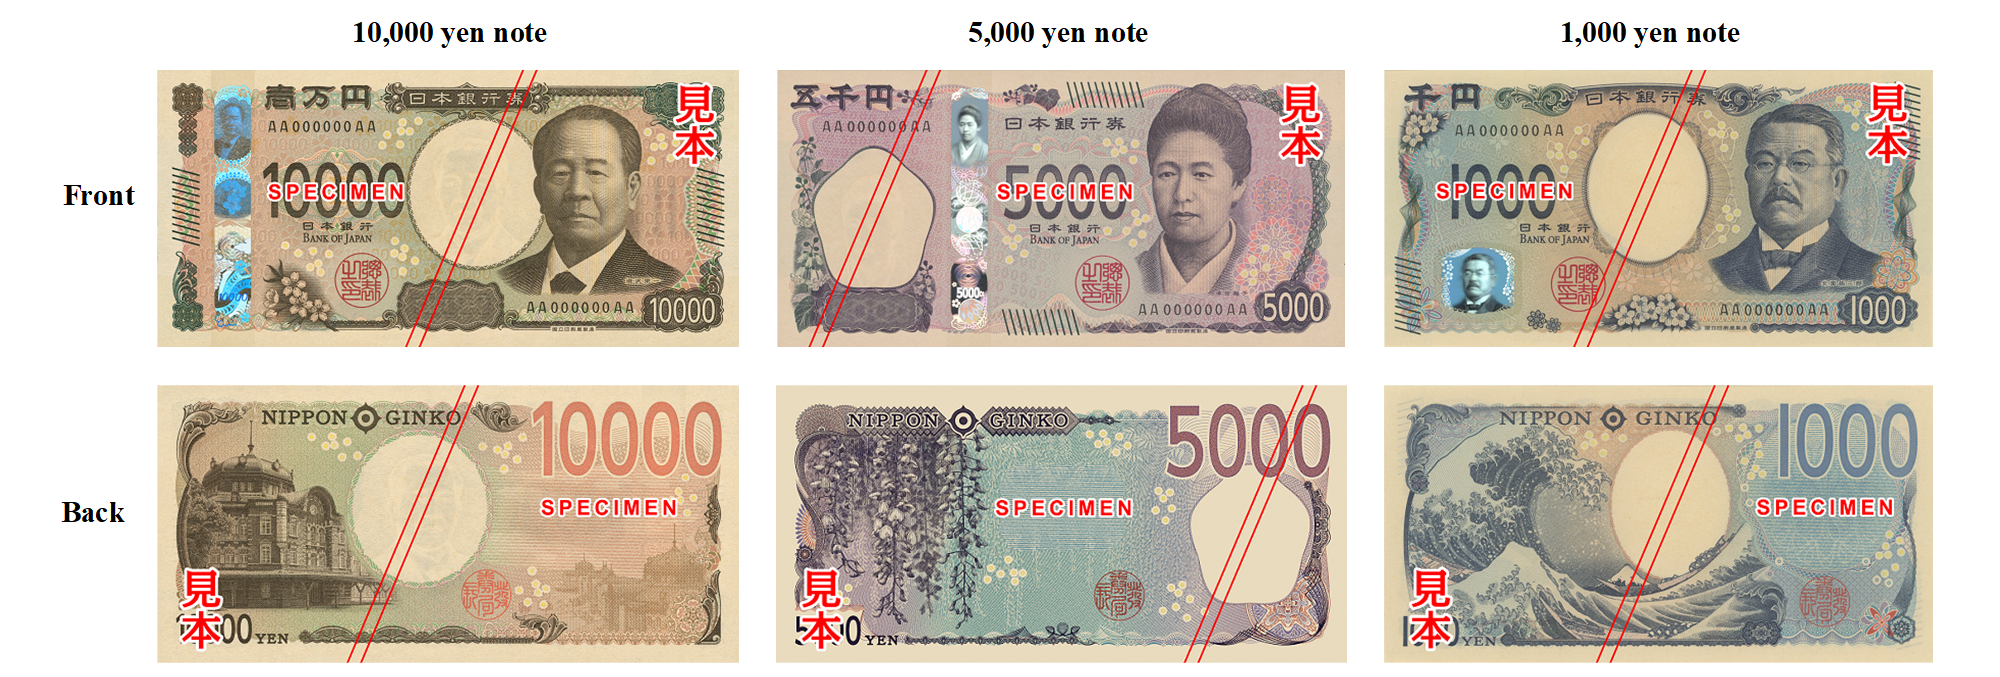 Images of the front and back of the 10,000 yen, 5,000 yen, and 1,000 yen notes.